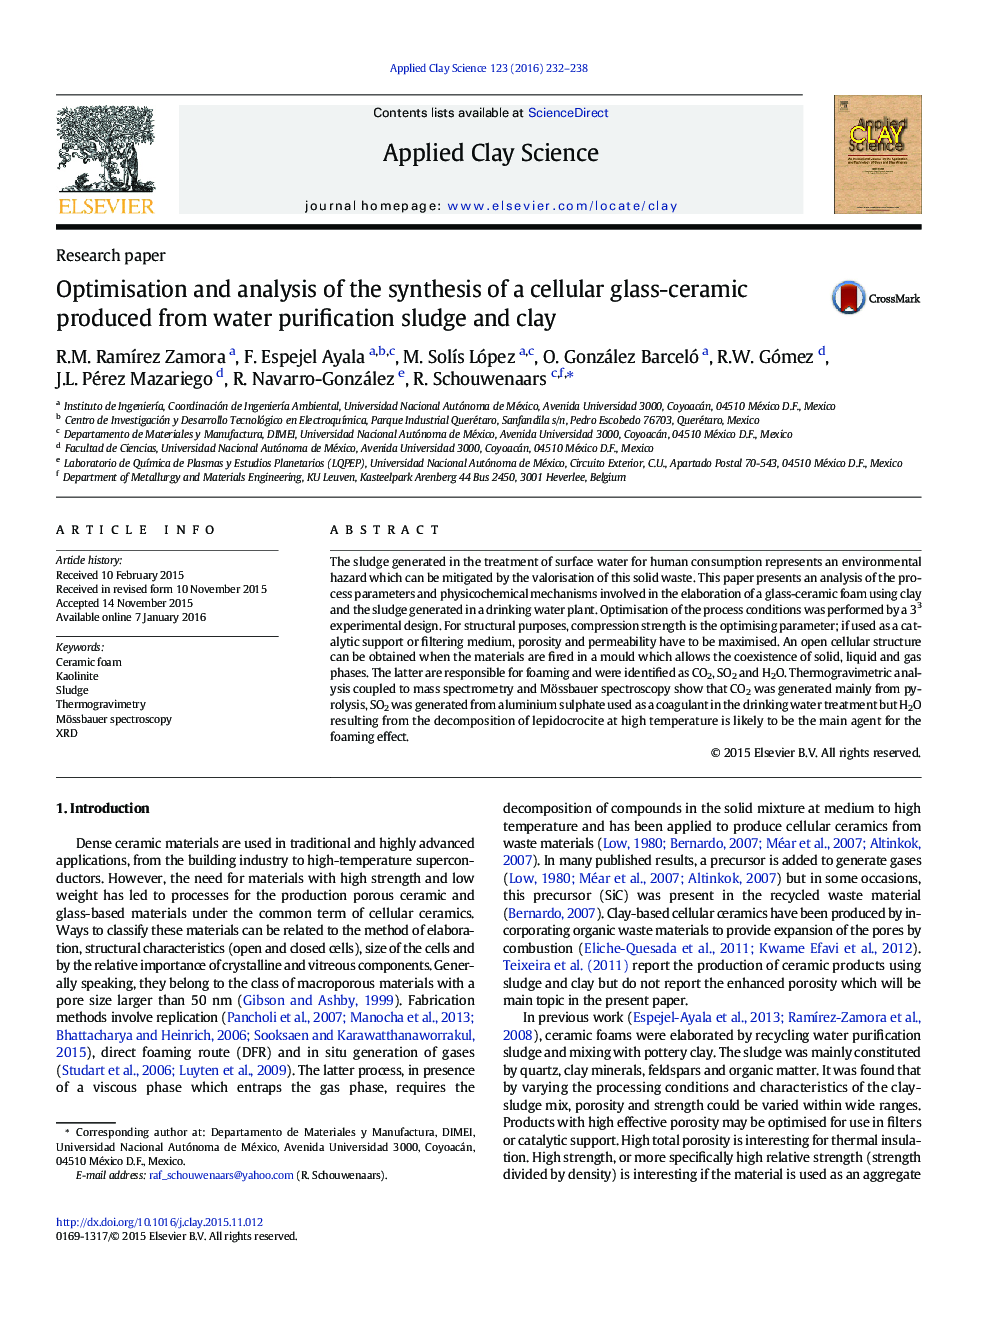 Optimisation and analysis of the synthesis of a cellular glass-ceramic produced from water purification sludge and clay